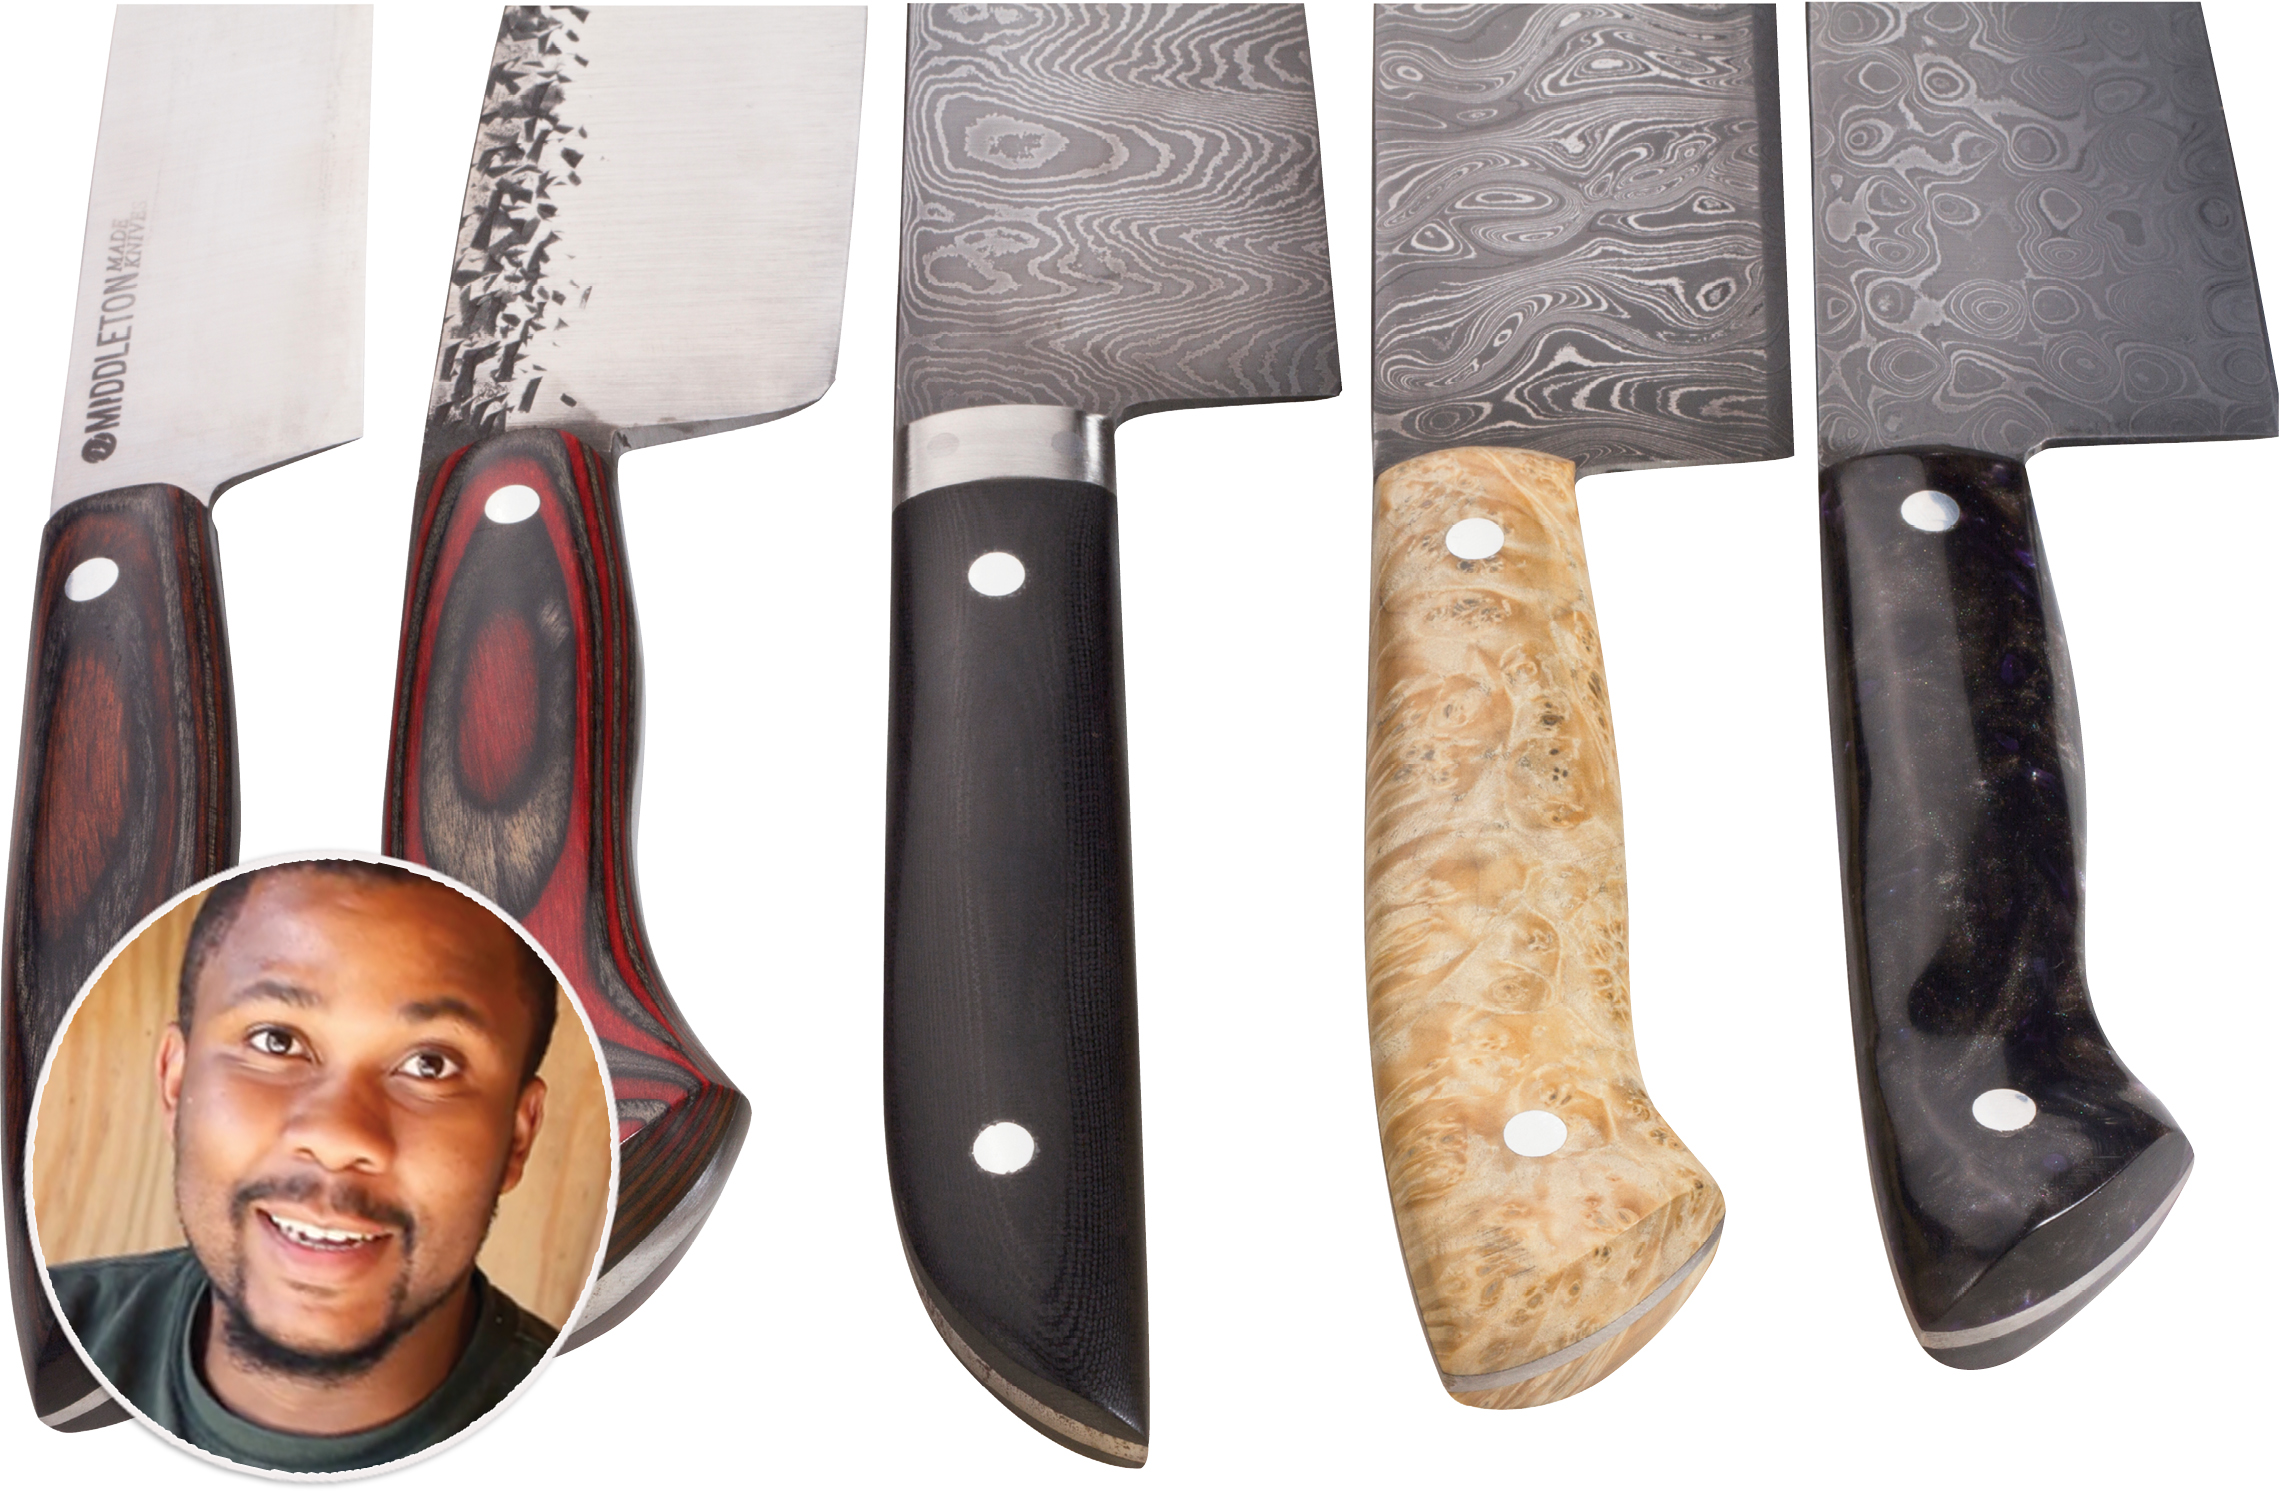 KNIVES: Middleton Made; custom-crafted blades by Saint Stephen-based artisan Quintin Middleton